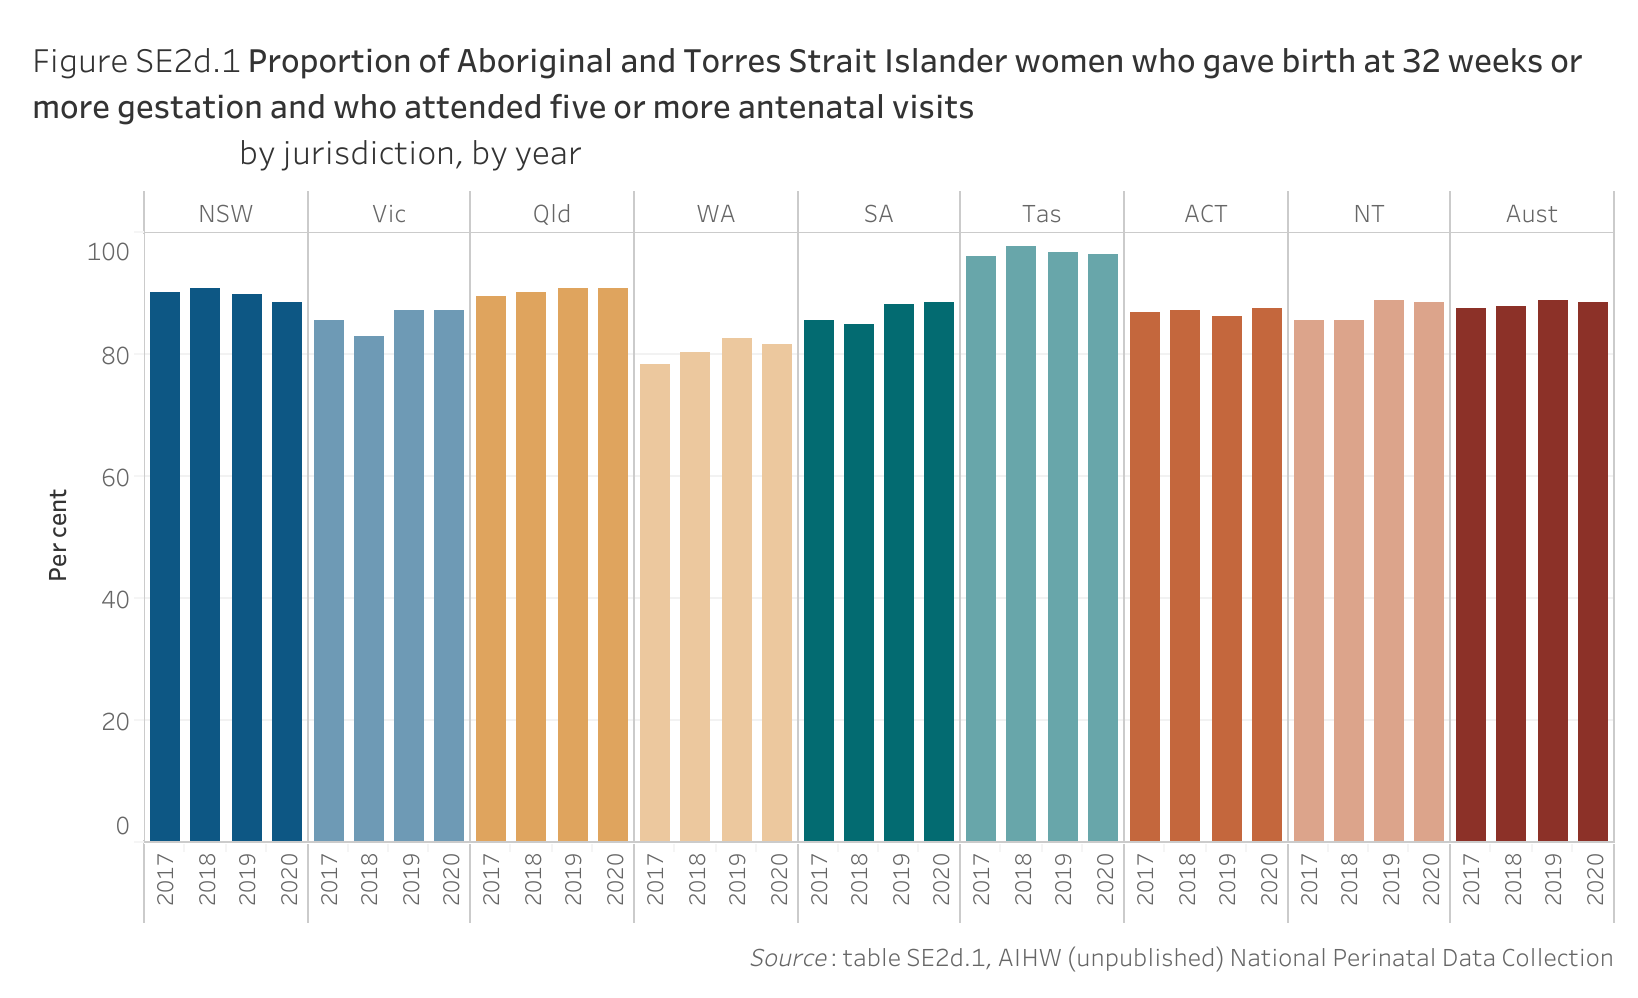 Figure SE2d.1 shows the proportion of Aboriginal and Torres Strait Islander women who gave birth at 32 weeks or more gestation and who attended five or more antenatal visits, by jurisdiction, by year. More details can be found within the text near this image.